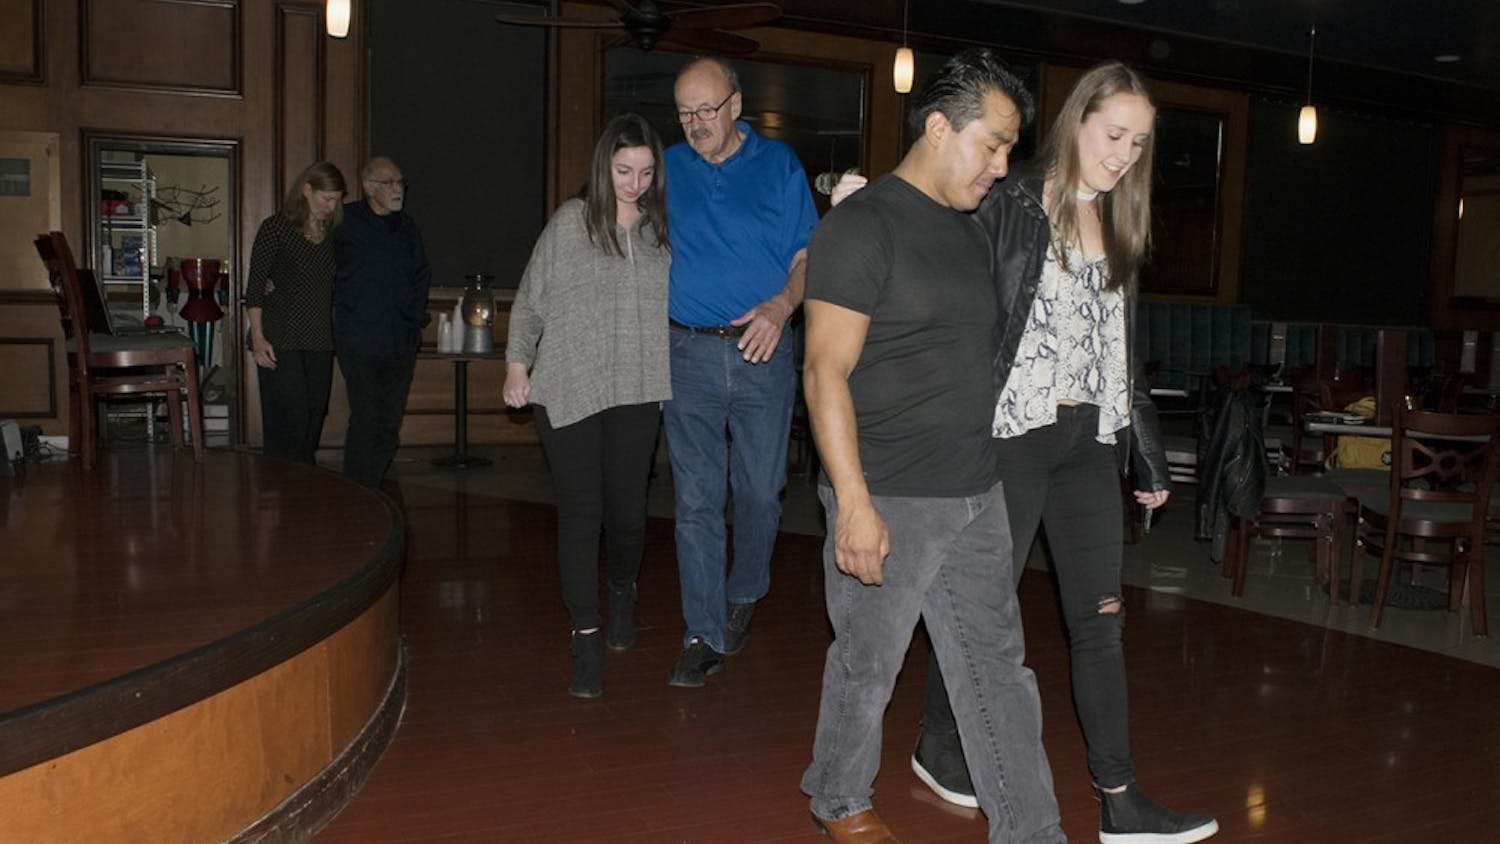 Attendees of the beginner tango class at Serendipity Martini Bar practice their walking in time to Argentine tango music Monday night. David Crosley, a guest teacher from Indianapolis, encouraged the dancers to go “inside the music.”